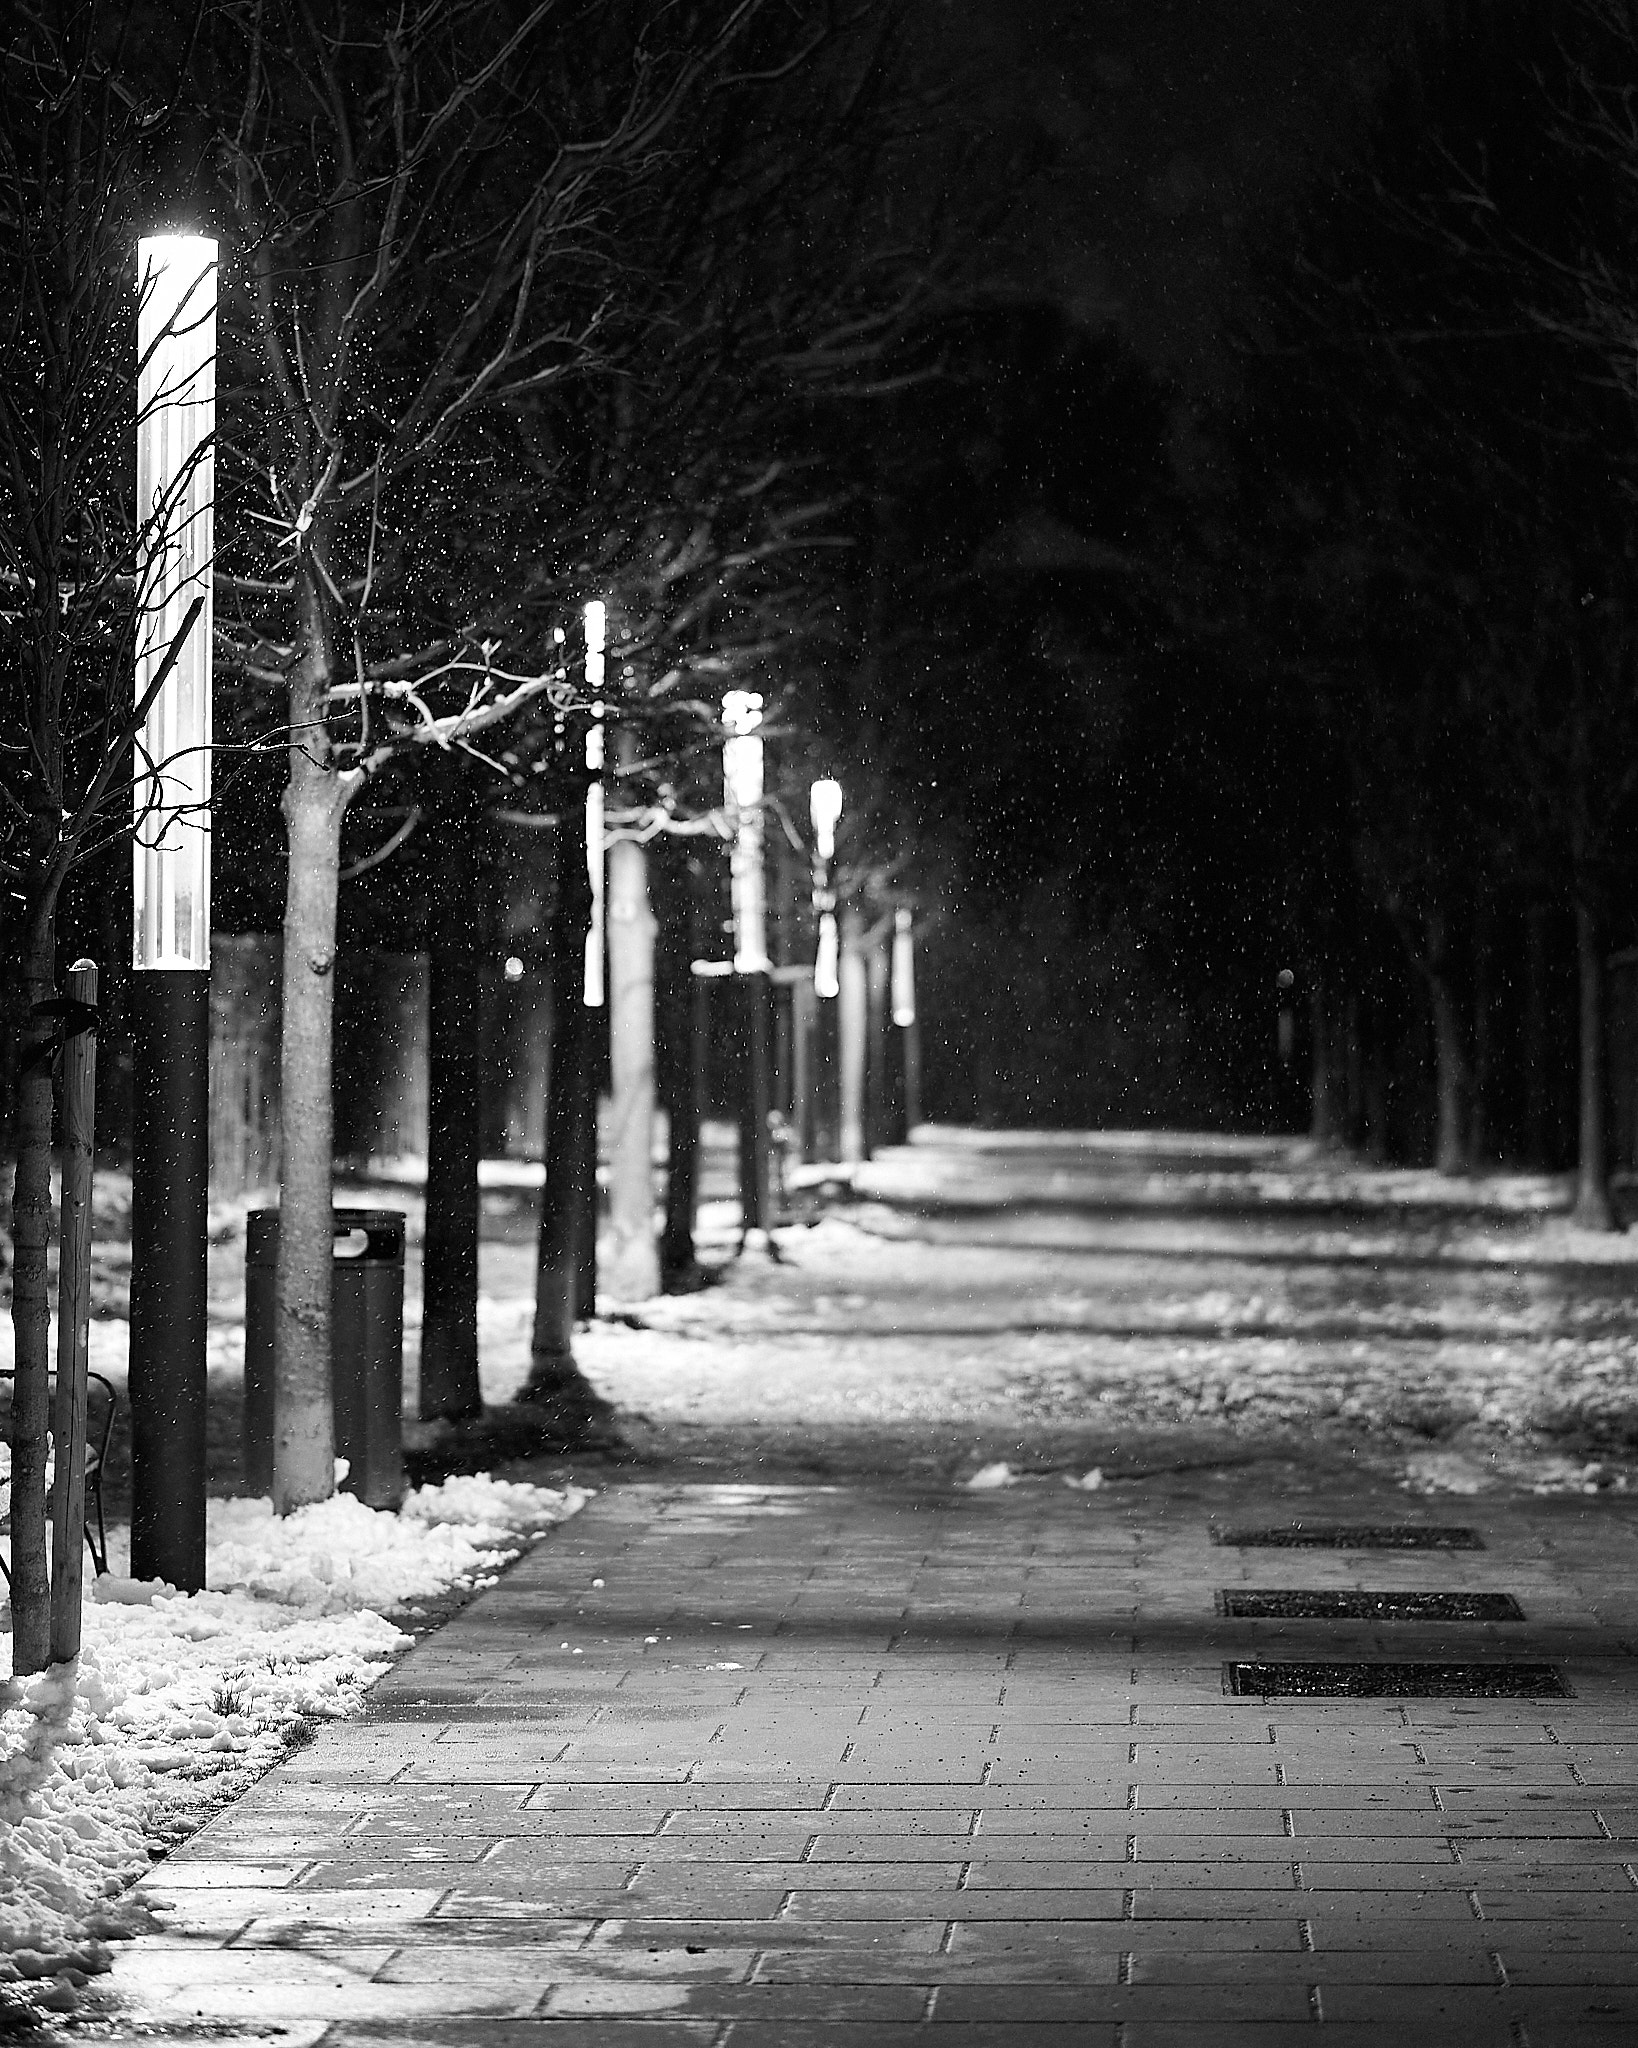 Silent Sentinels of the Snowy Path